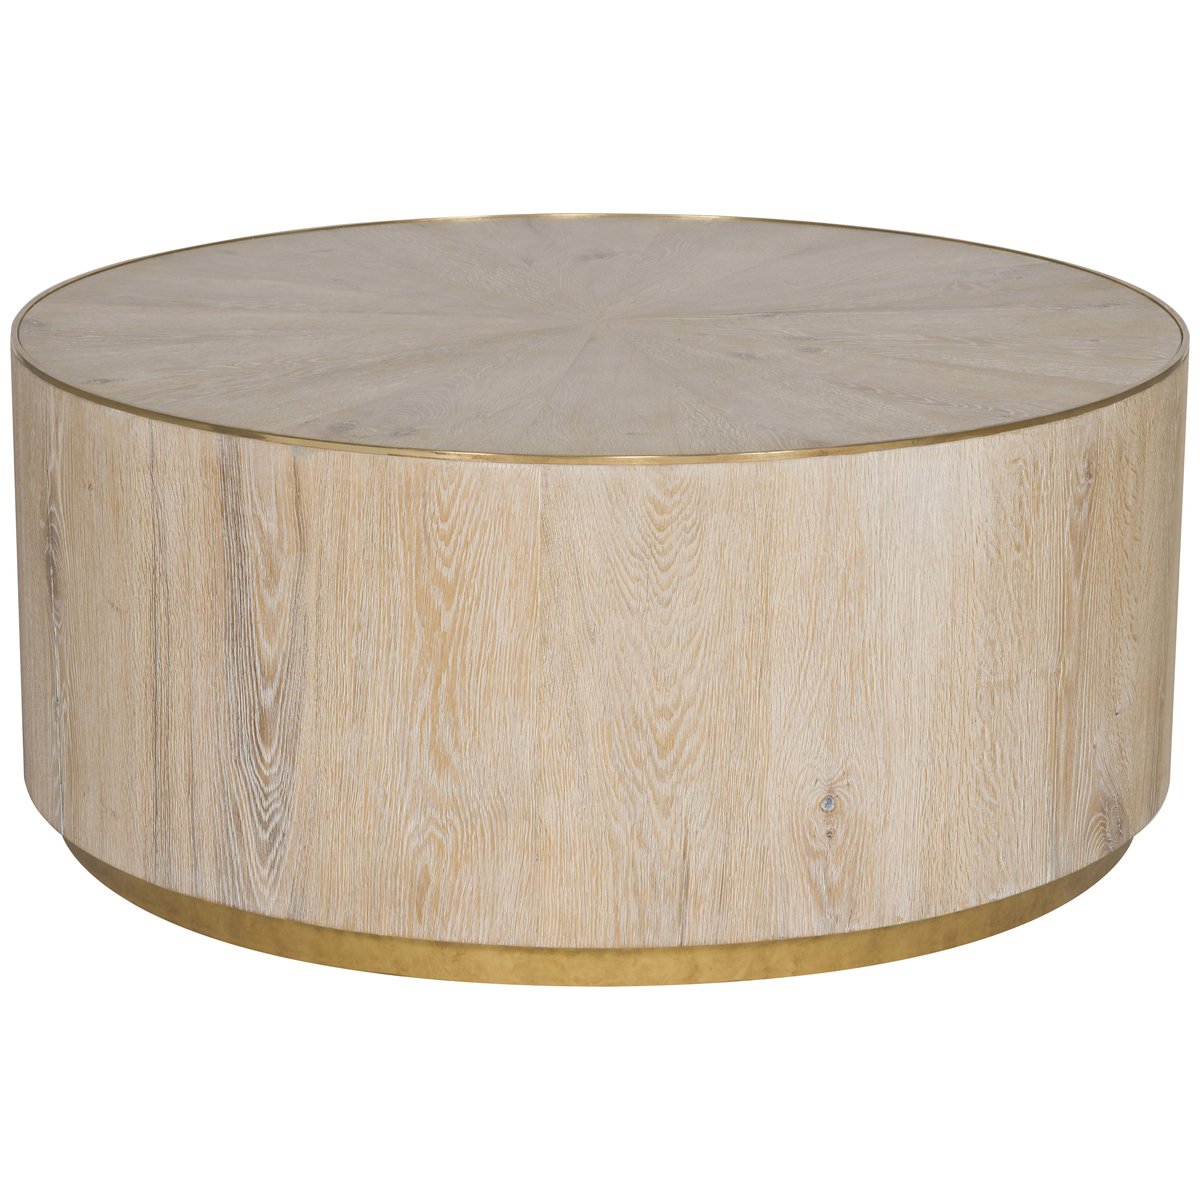 Vanguard Furniture Finch Round Cocktail Table